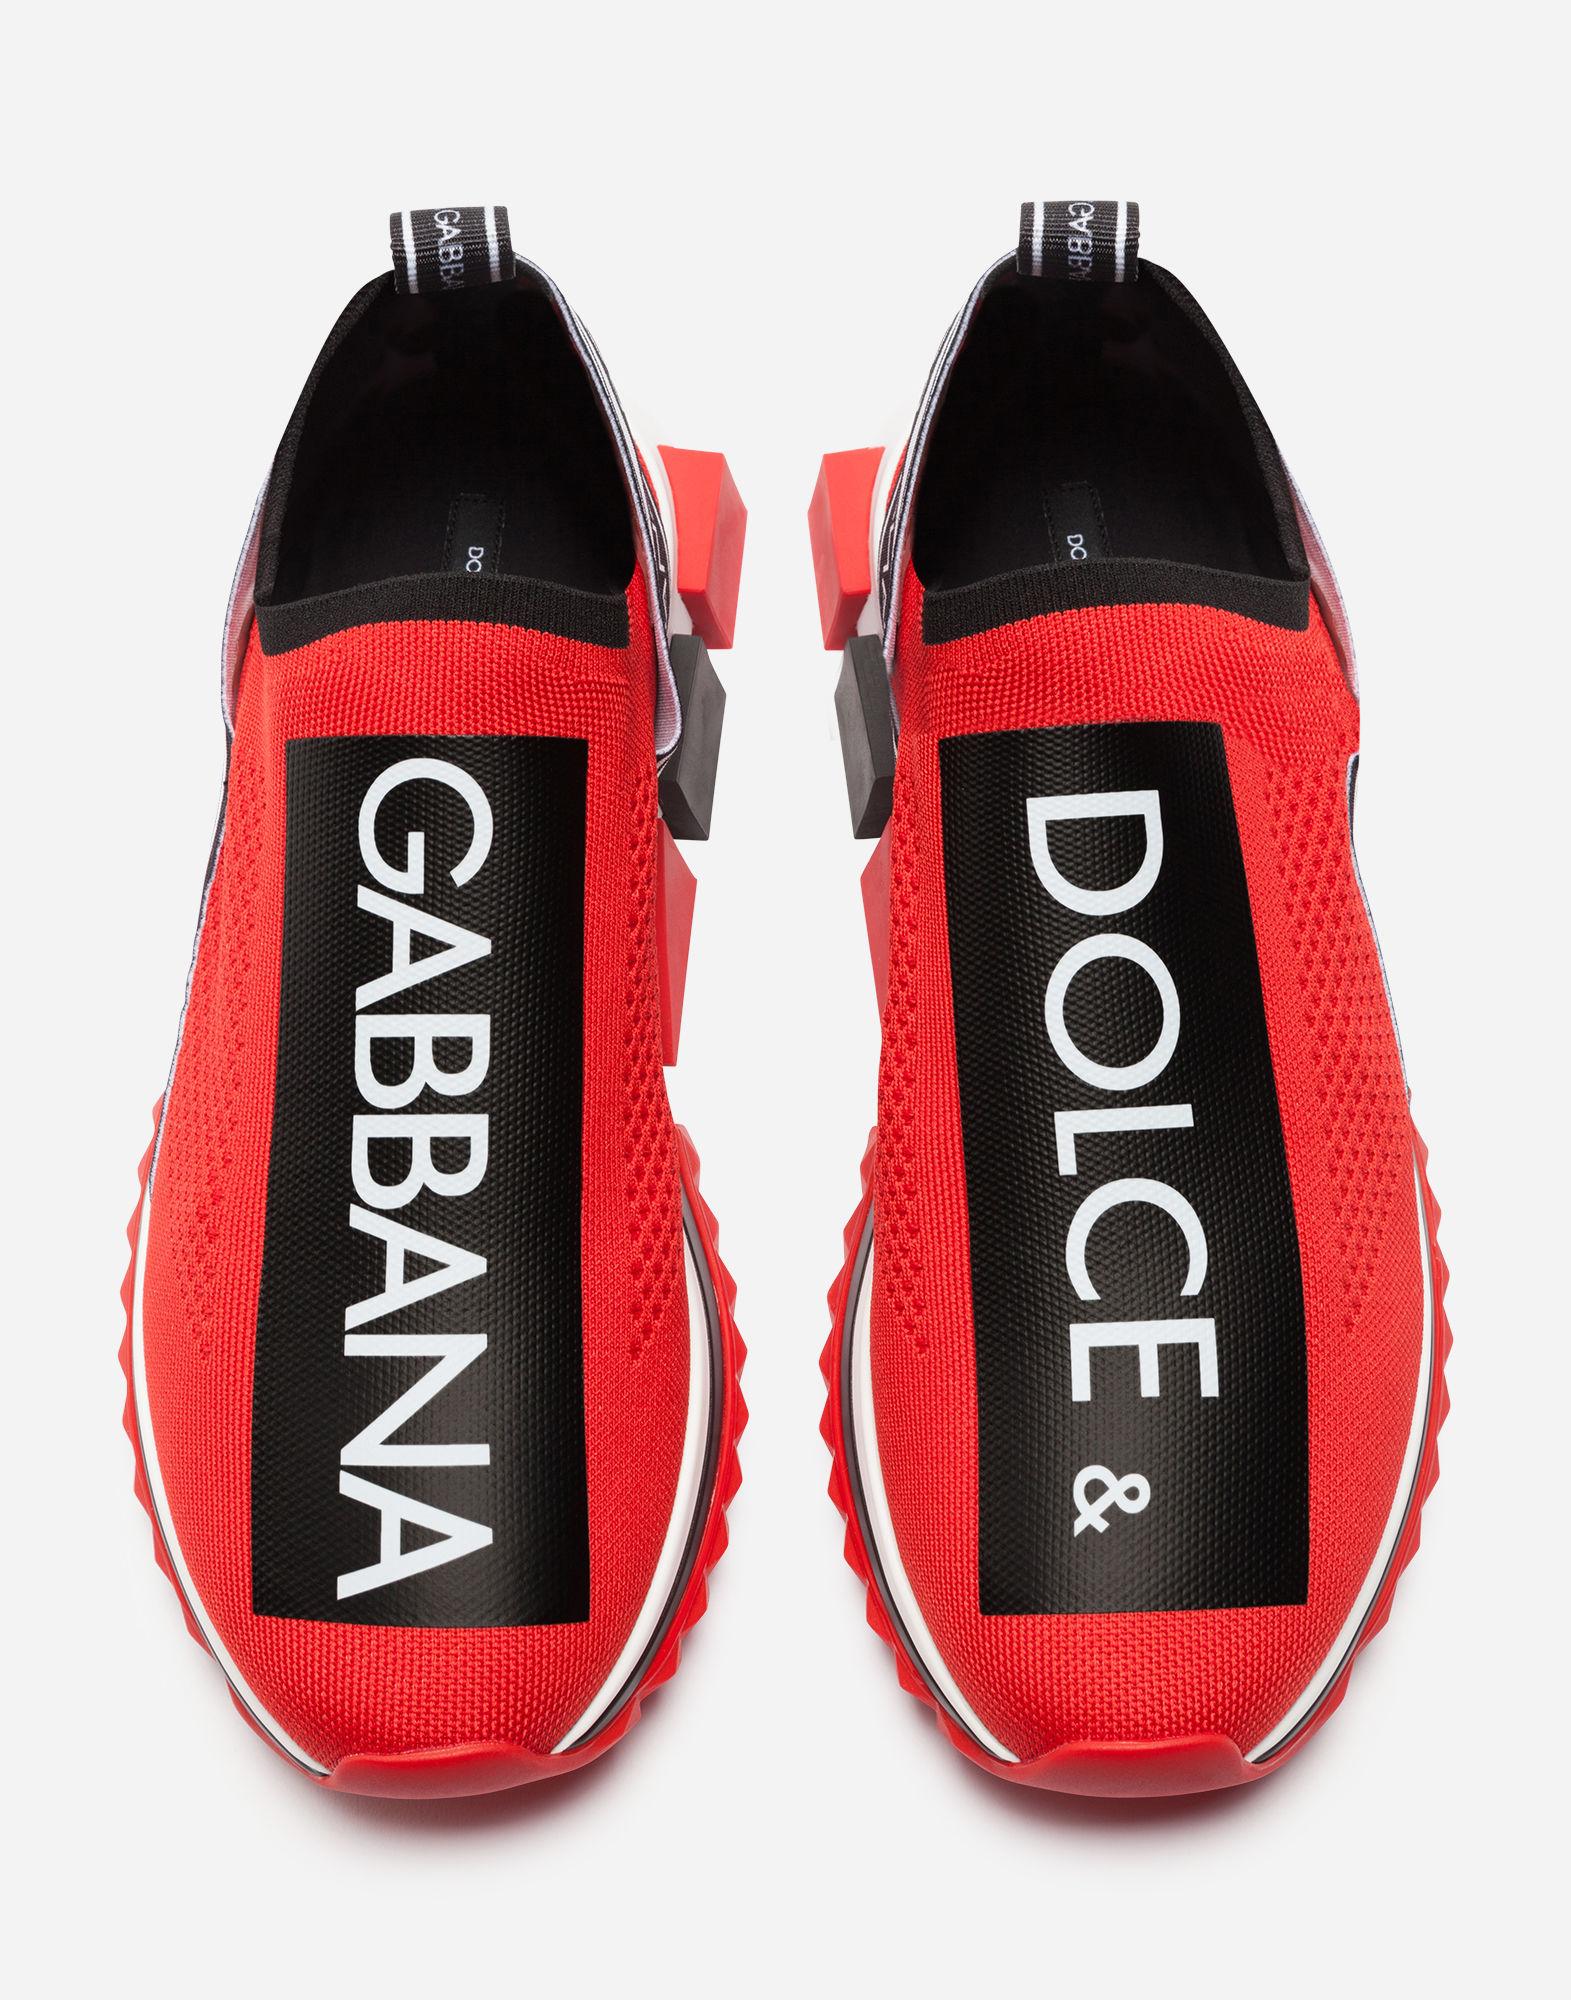 Dolce & Gabbana Synthetic Sorrento Bassa Maglina Tech Knit Sneakers in